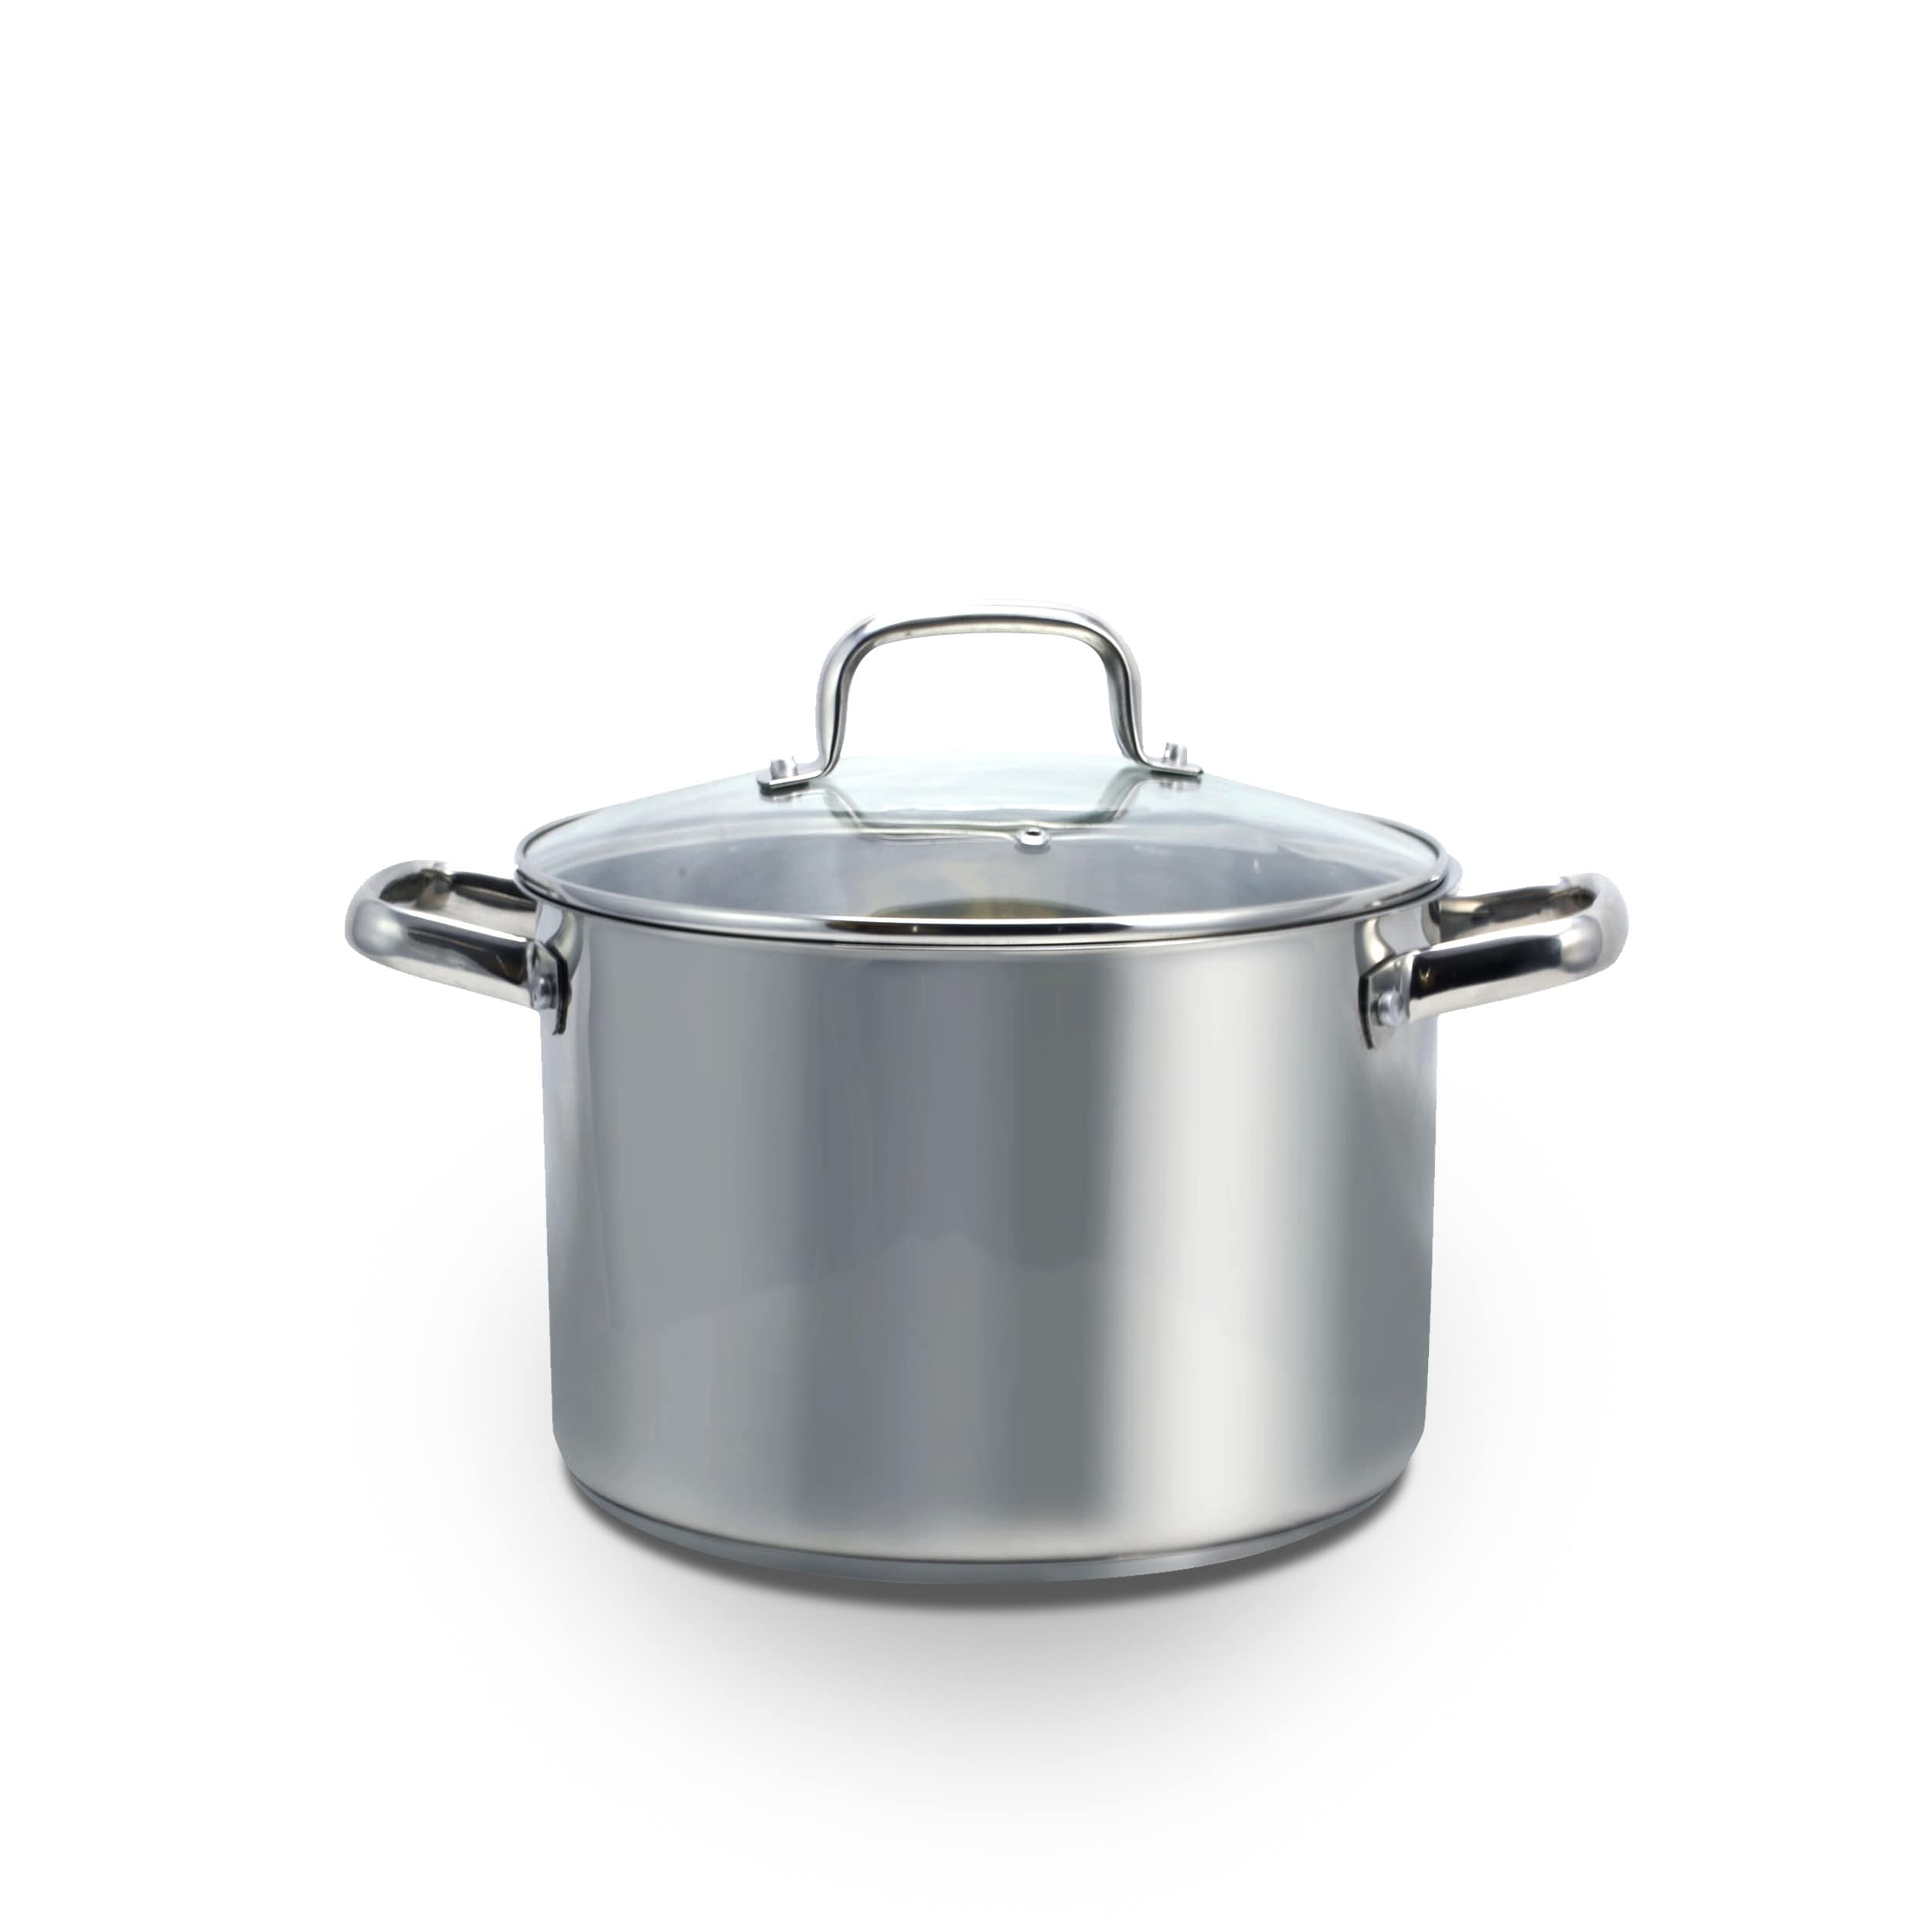 Oster Adenmore 12 Quart Stainless Steel Stock Pot With Tempered